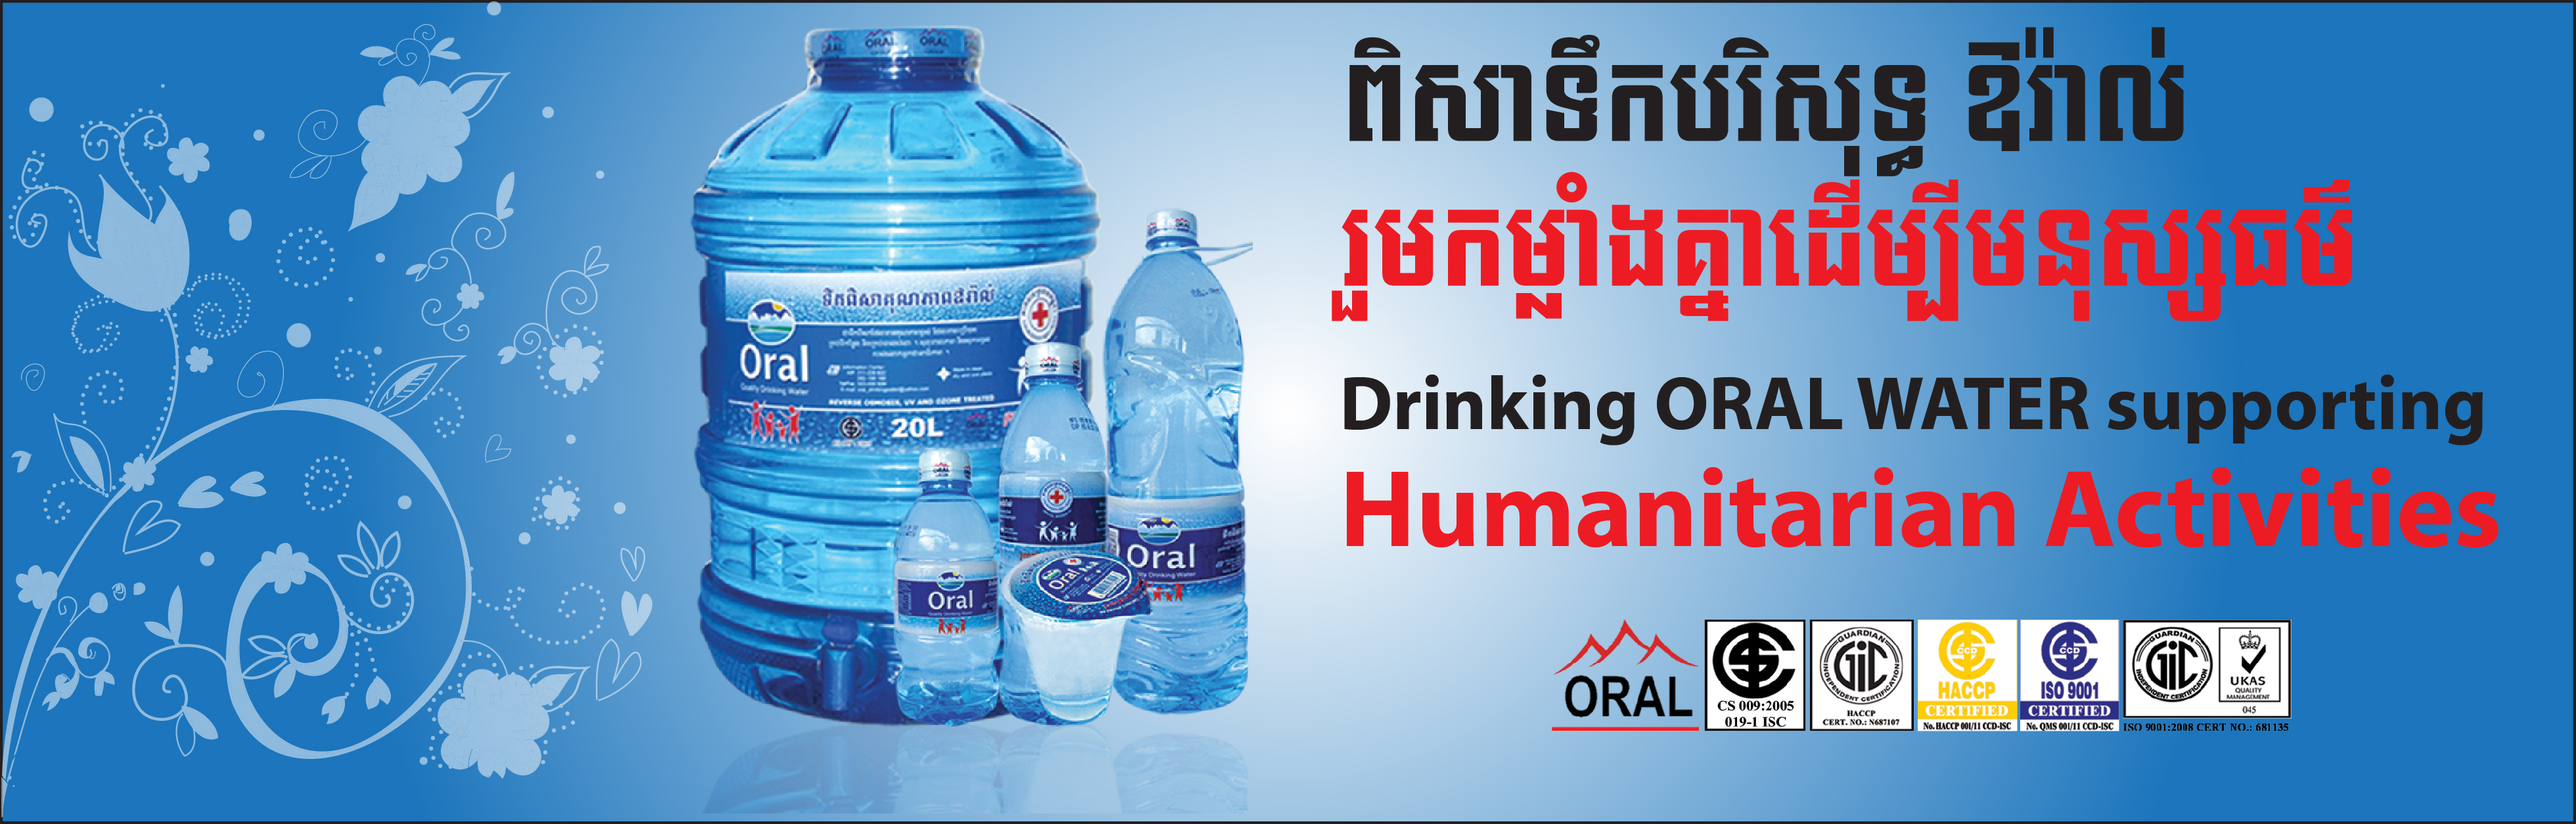 Drinking ORAL WATER supporting humanitarian activities